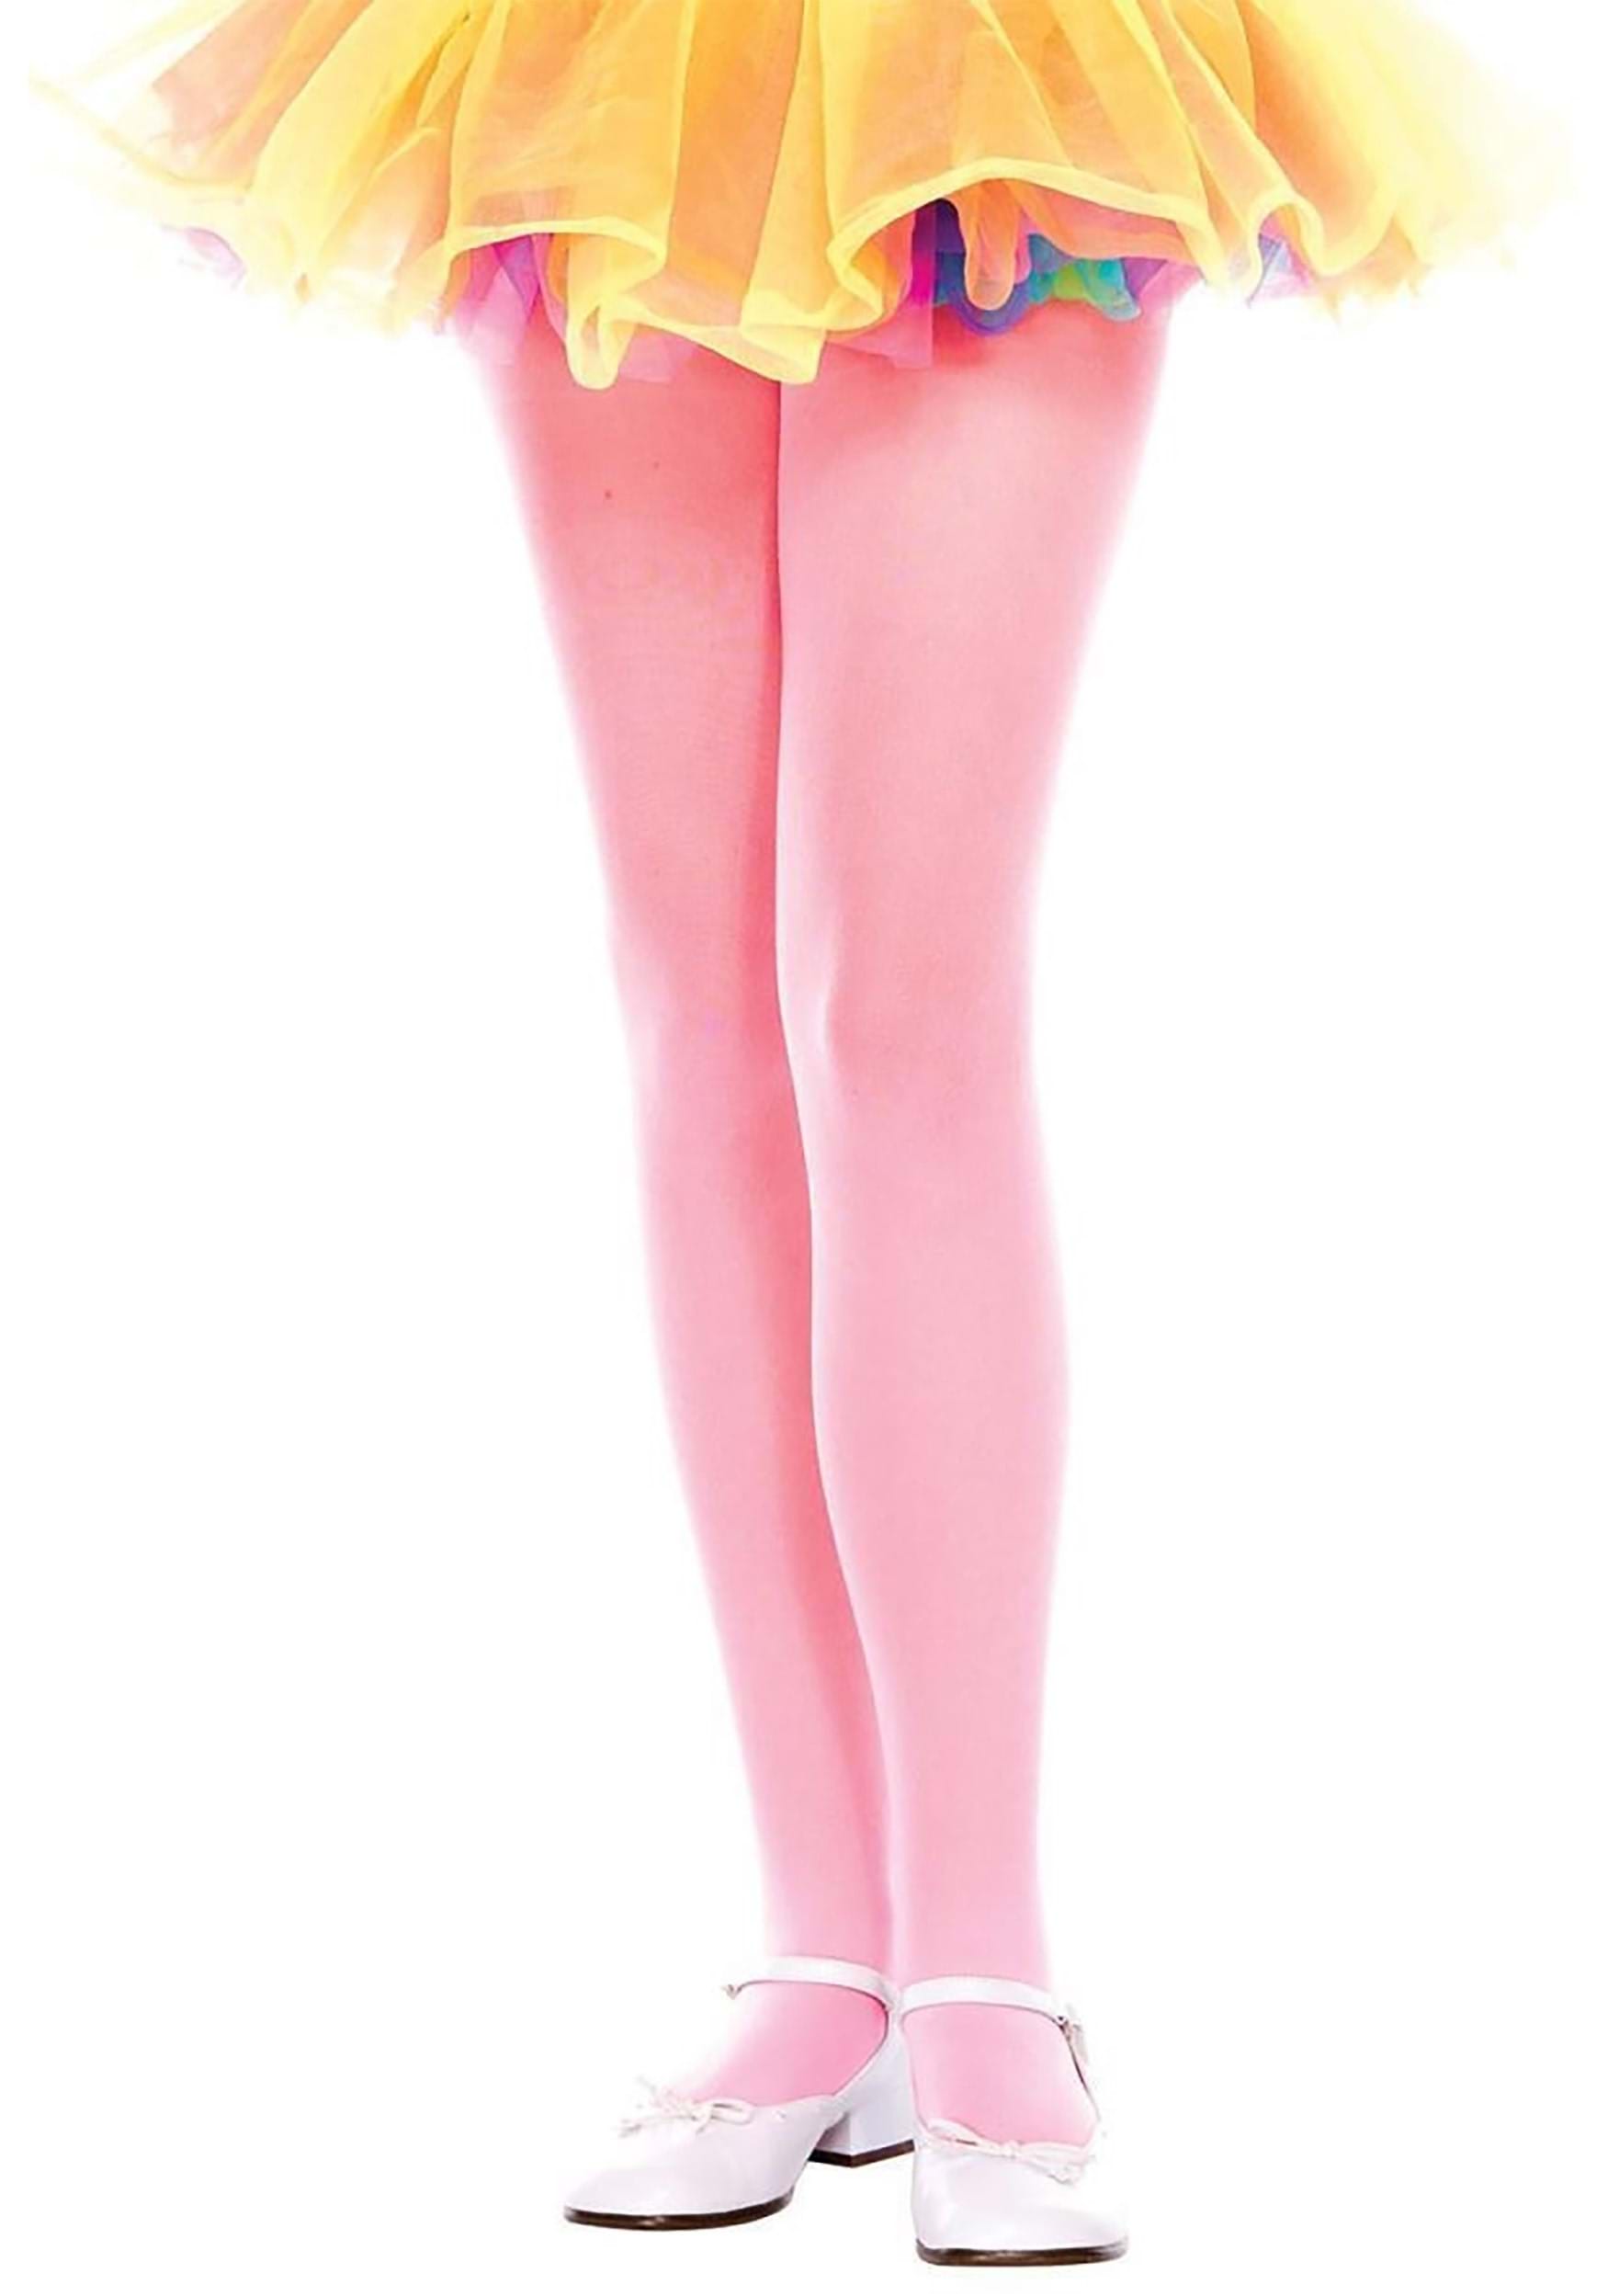 Girl's Light Pink Opaque Tights